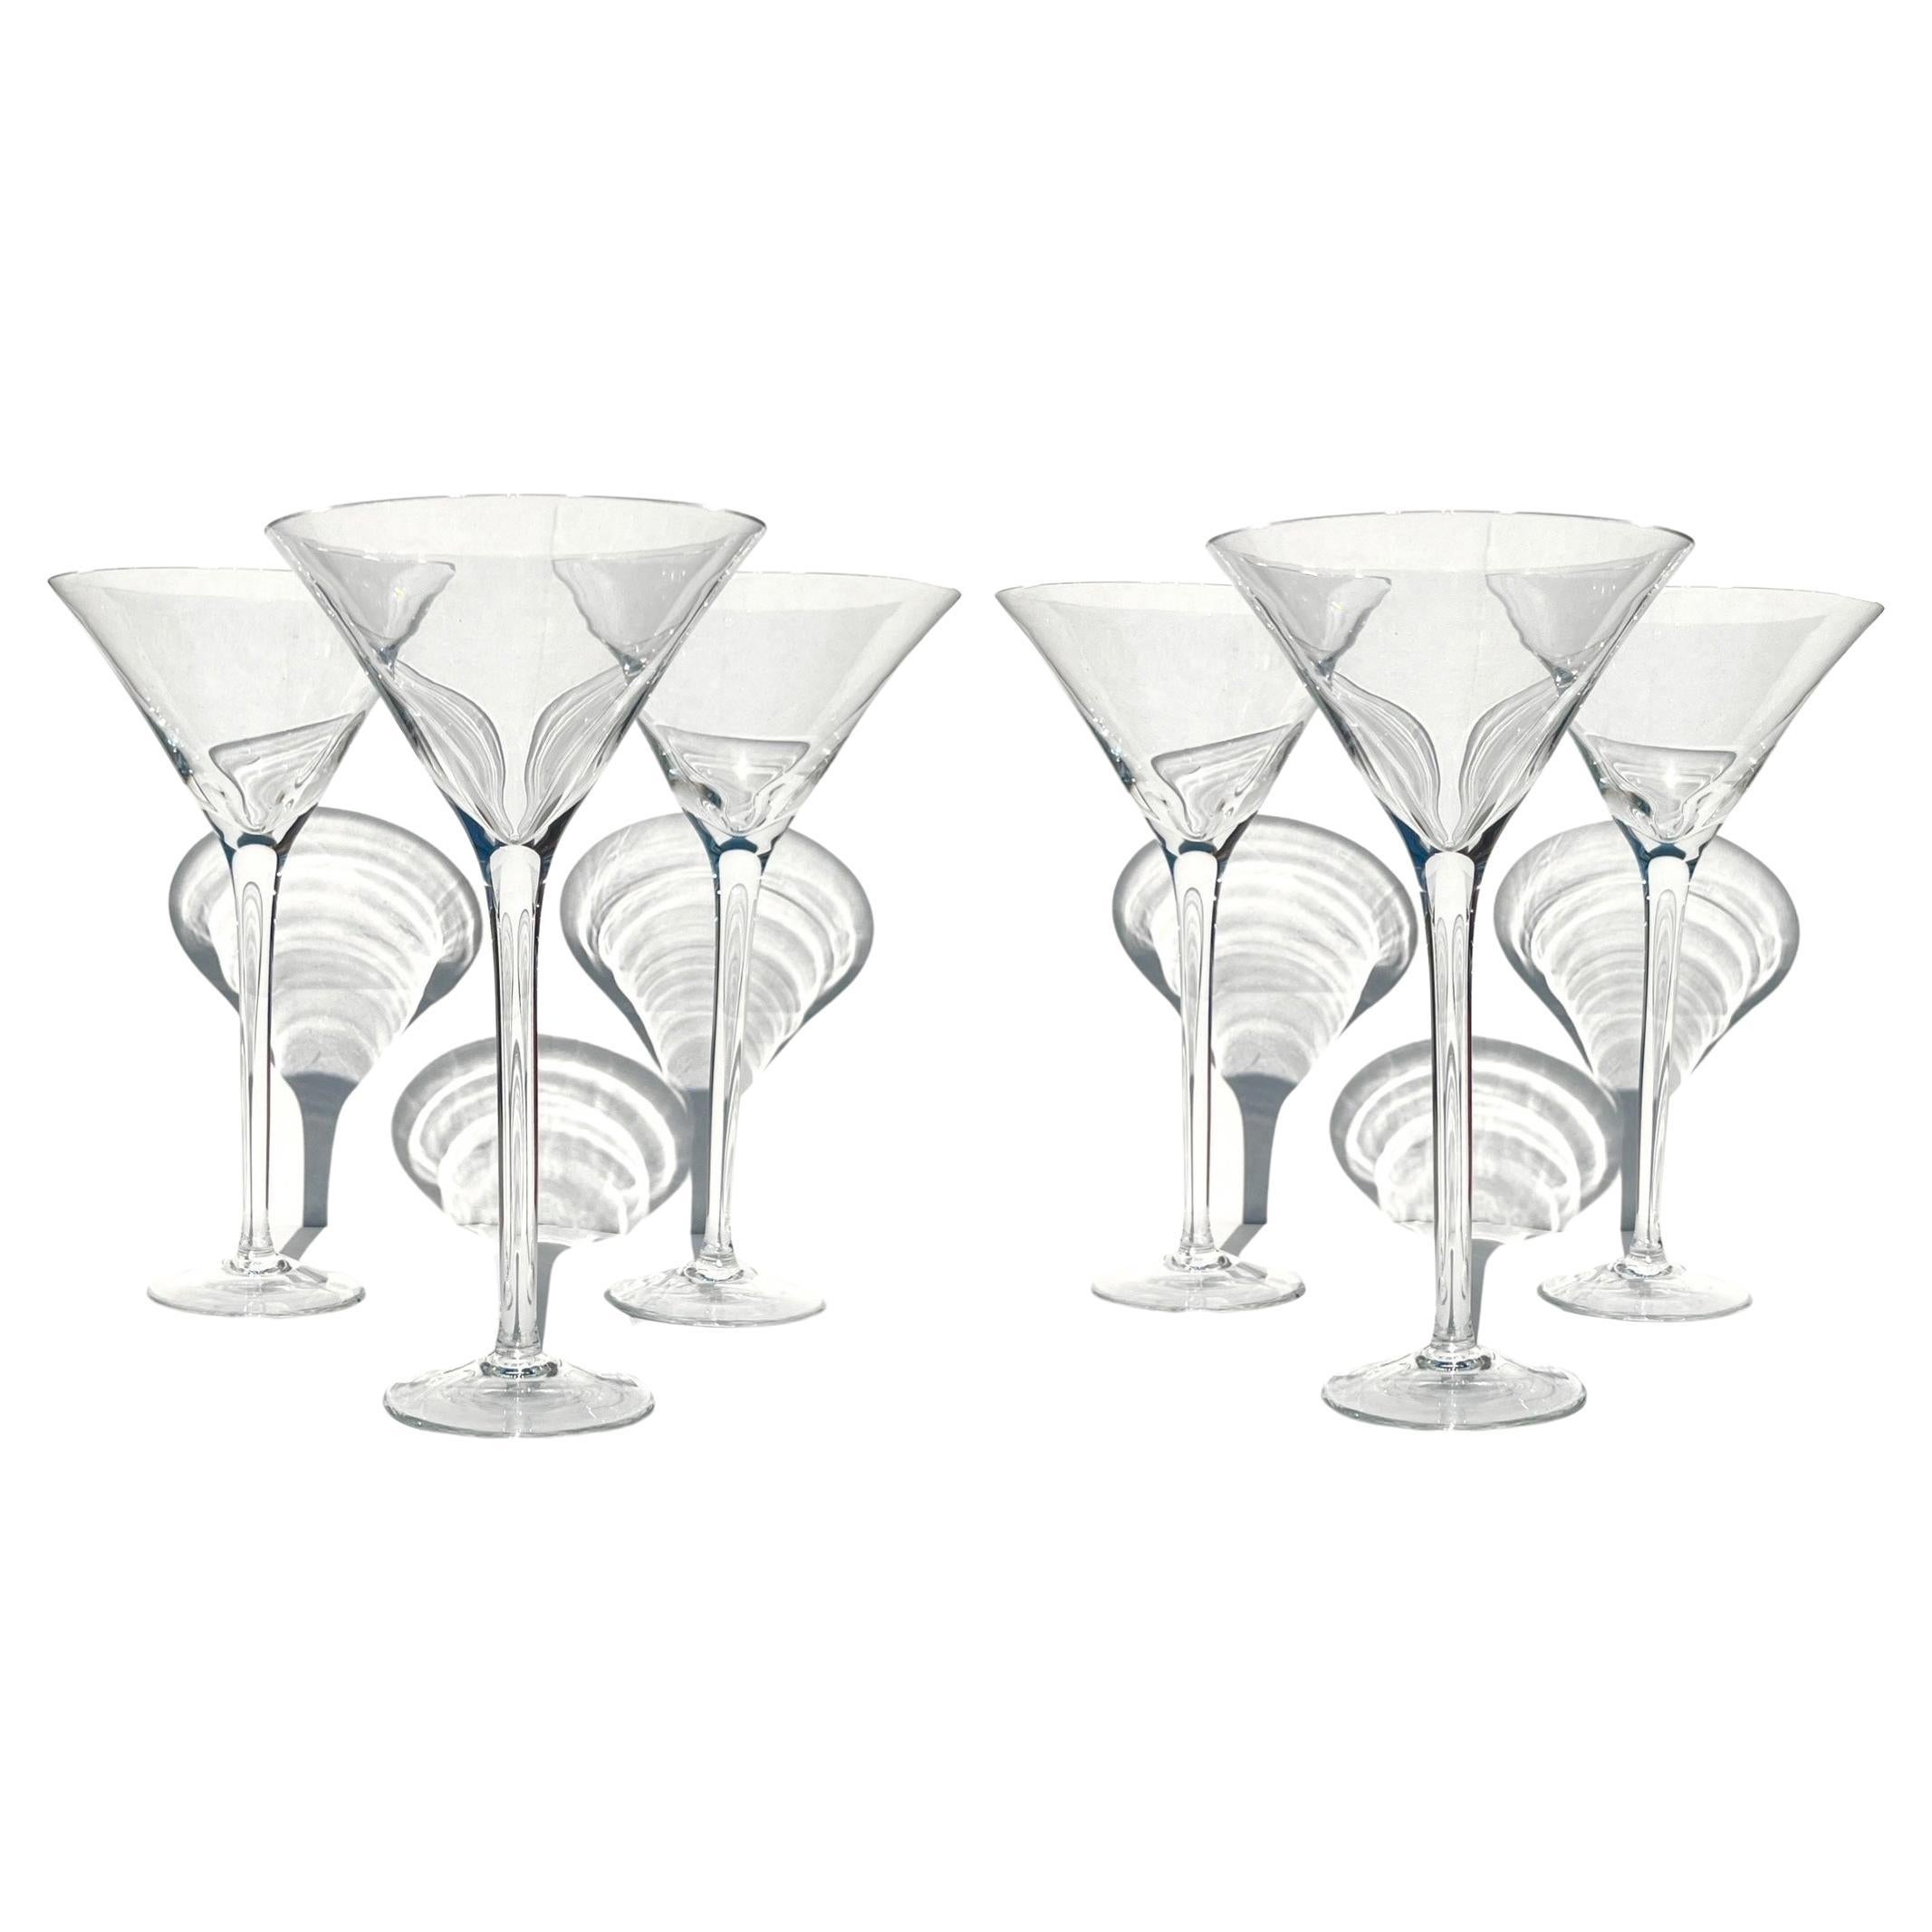 Set of stunning long stem cocktail glasses with extra large bowls. These vintage blown stemware glasses are handmade by German artisans. Perfect for oversized cocktails, margaritas, or martinis. Makes a chic and cheerful addition to any barware